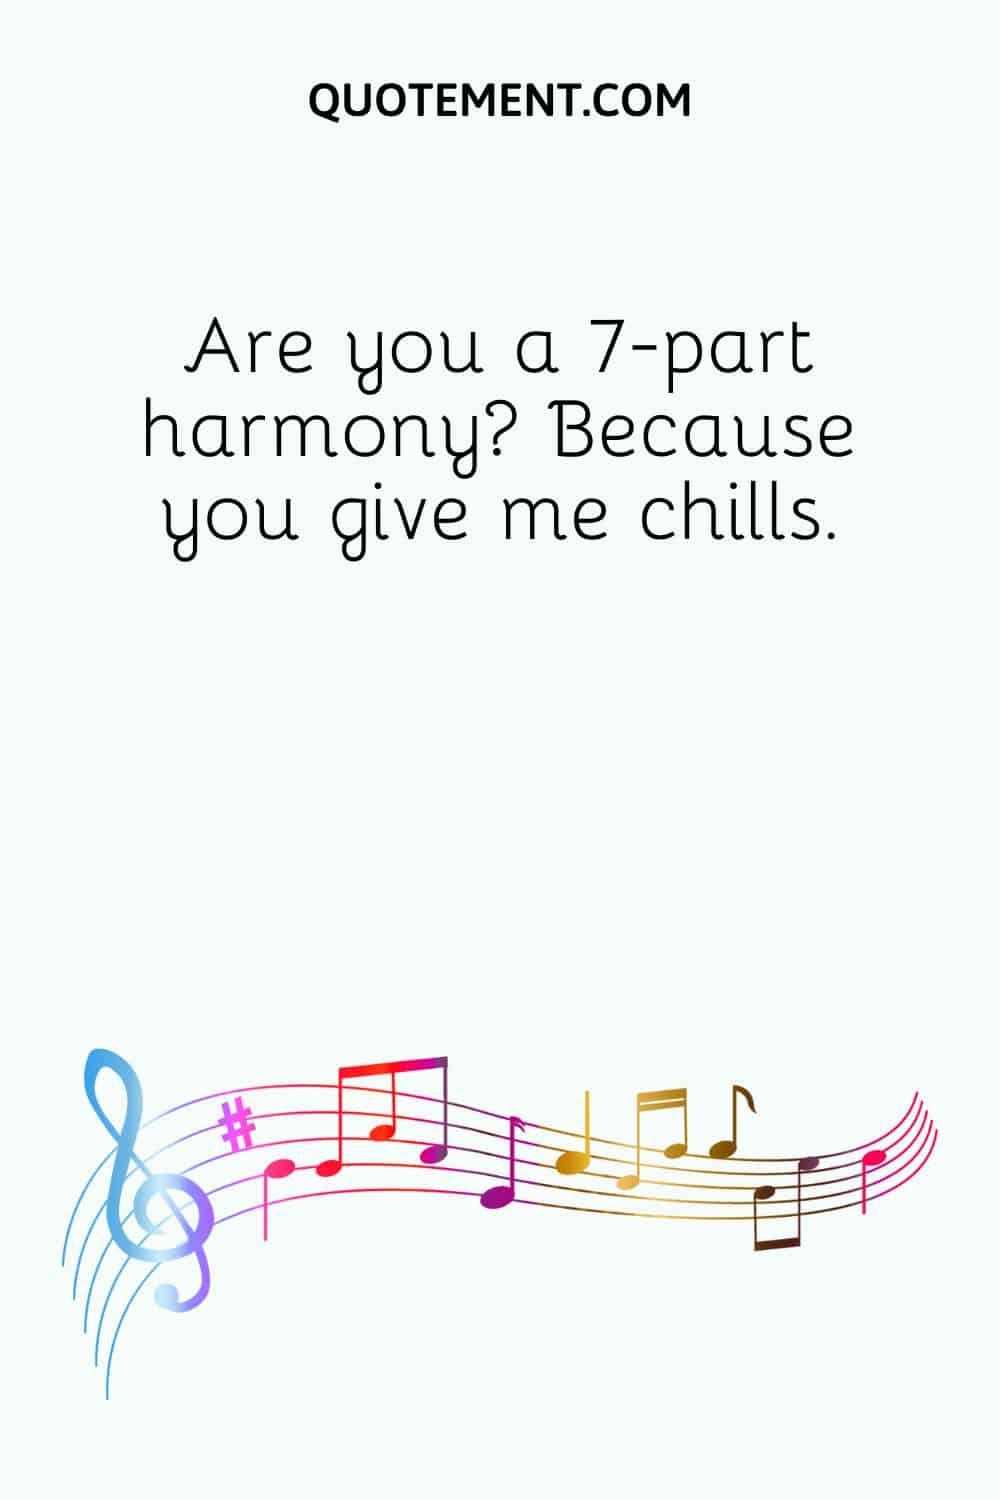 Are you a 7-part harmony? Because you give me chills.